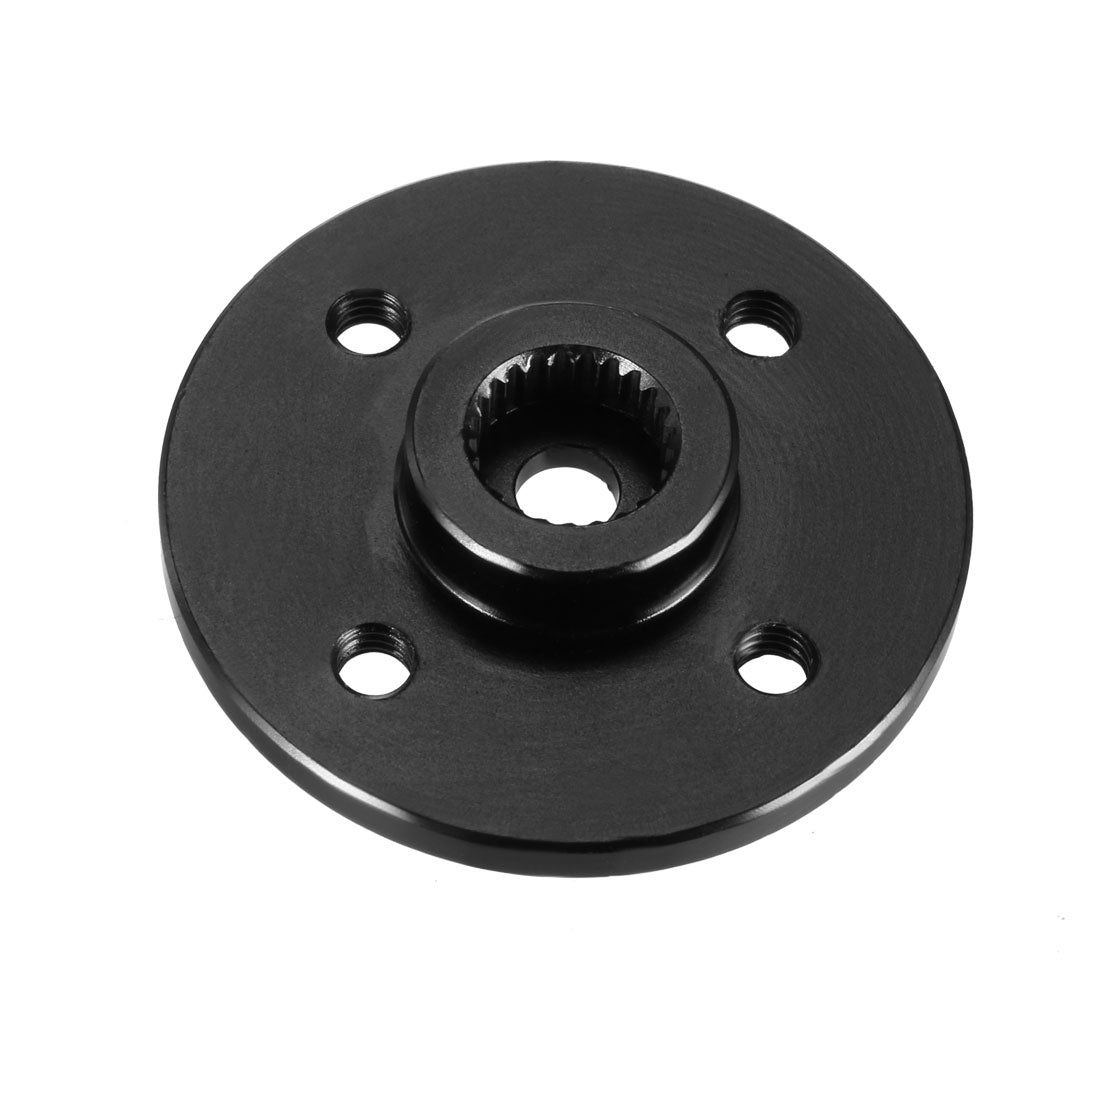 uxcell Uxcell 24T Round Type Servo Horn Robot Arm Black Aluminum Alloy Rocker Servo Accessories Disc Steering Arm 24.5mm for